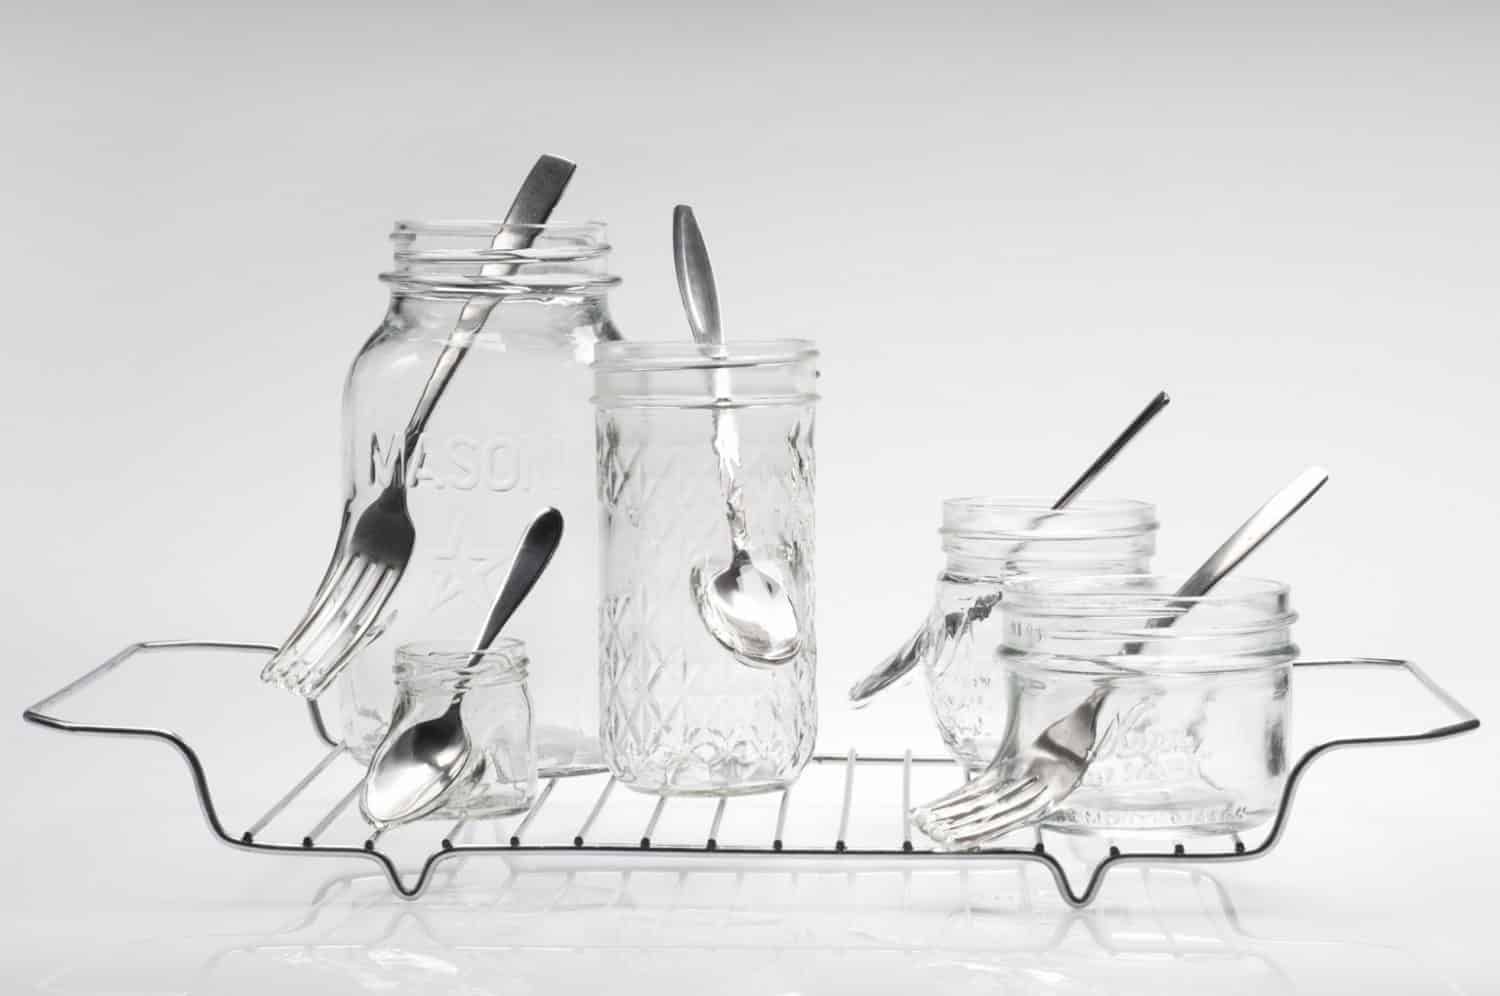 “Waste not want not,” Jelly jars, cutlery, stainless steel, 8.75 x 16.25 x 9 inches, photo credit: Elizabeth Torgerson-Lamark